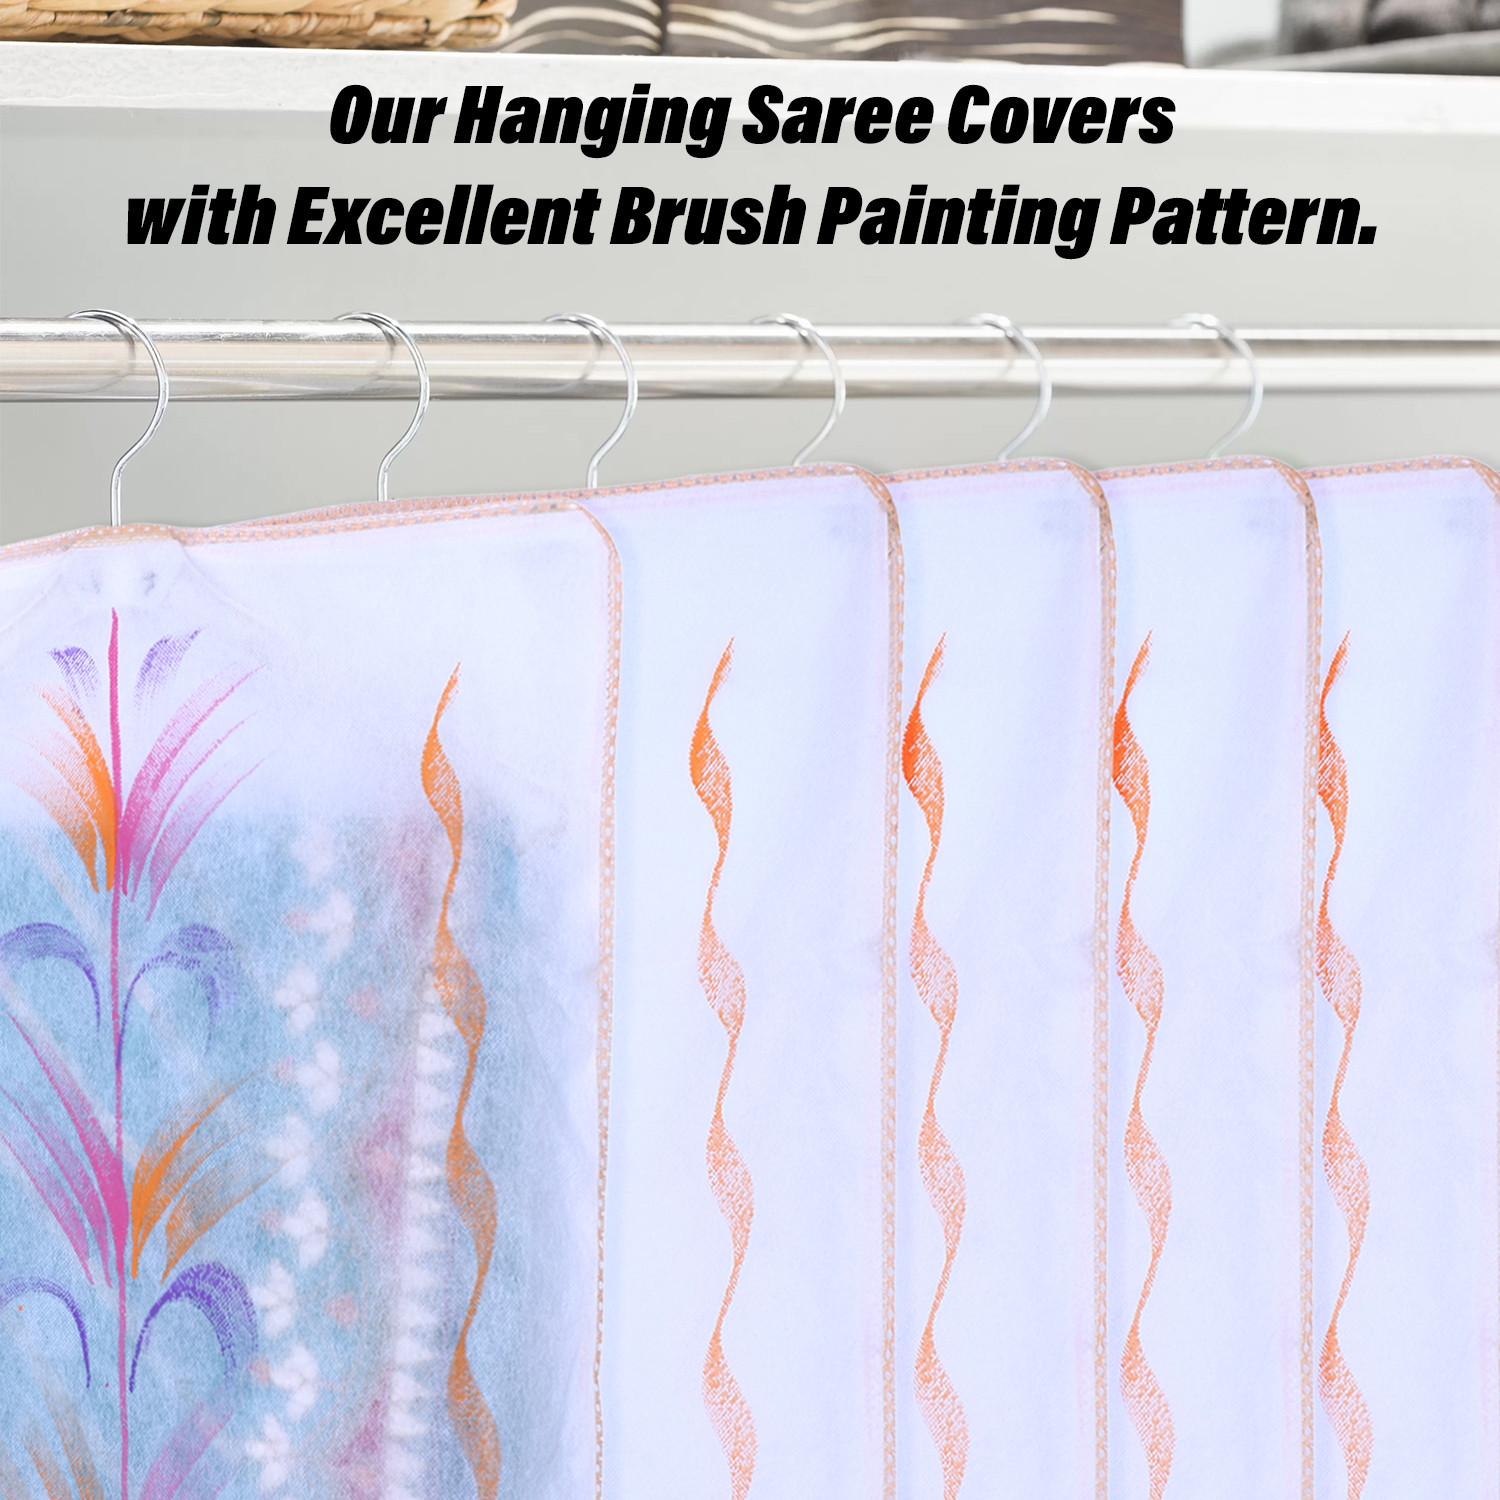 Kuber Industries Hanging Saree Cover | Brush Painting Pattern Saree Cover | Non-Woven Saree Covers for Home | Saree Cover with Small Transparent view |  Orange